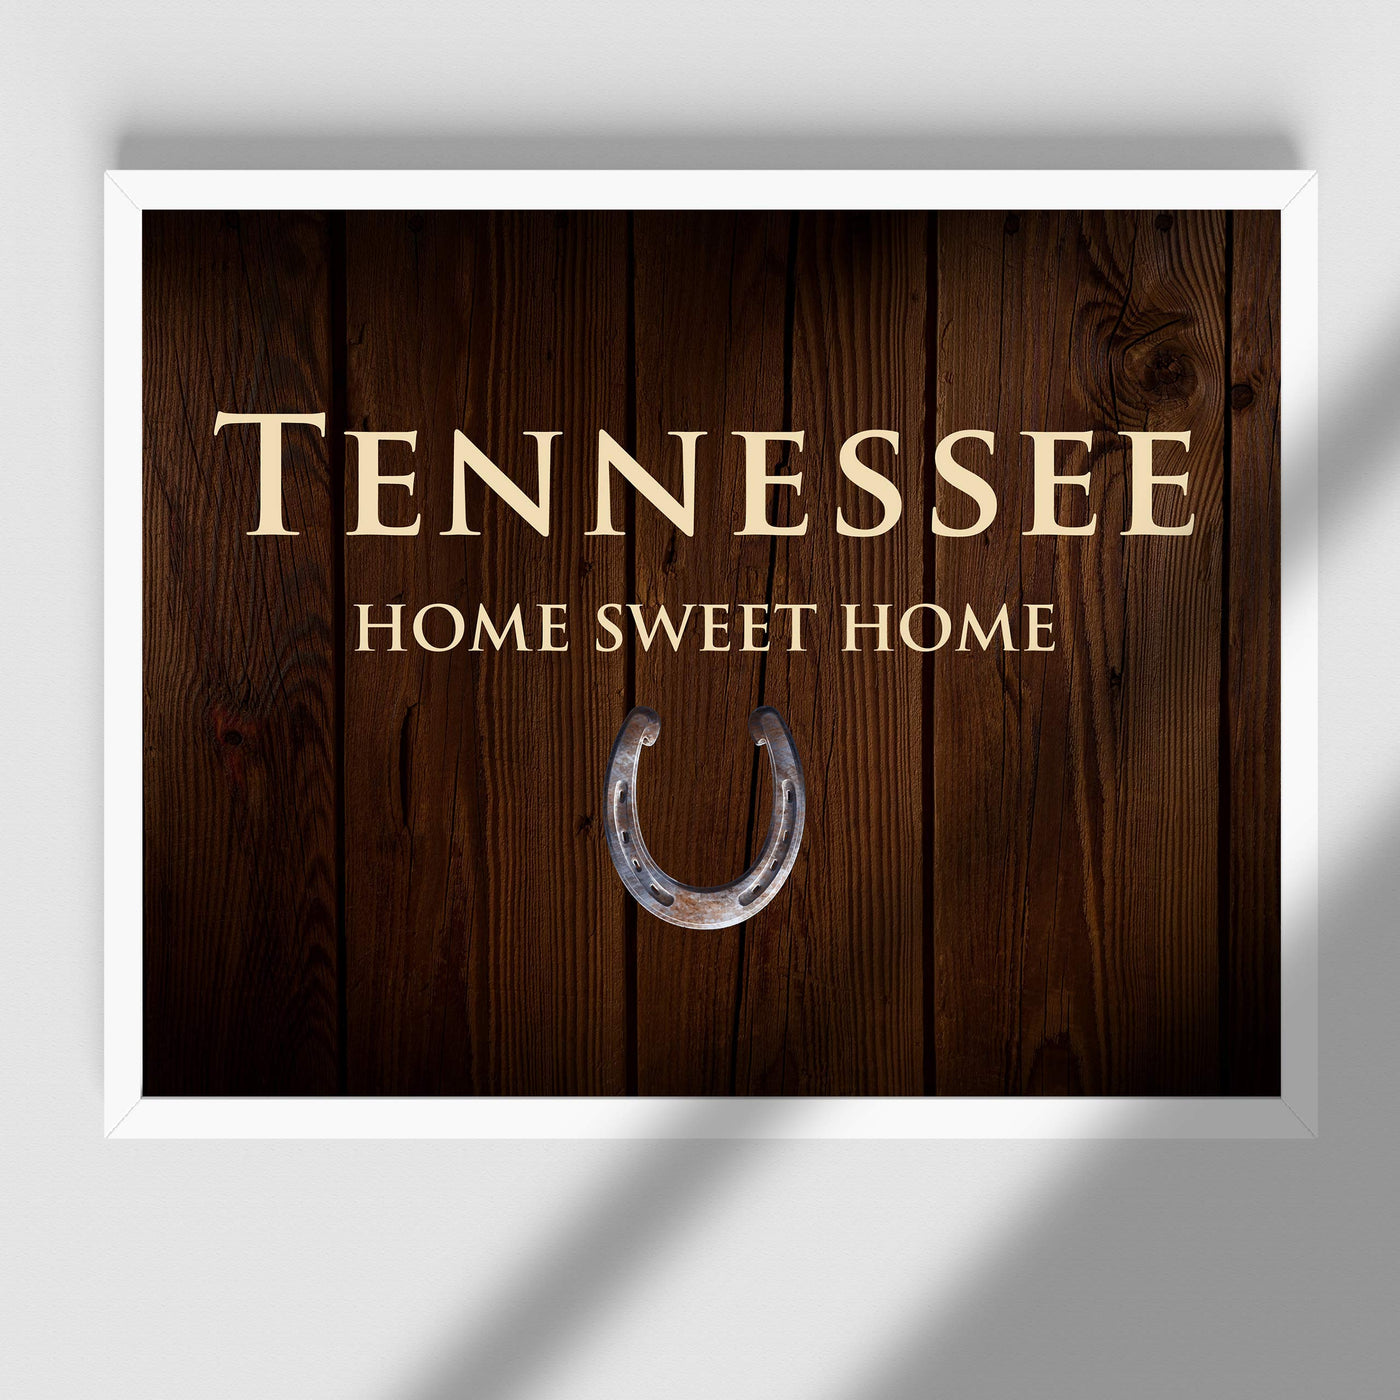 Tennessee-Home Sweet Home State Wall Decor -10 x 8" Country Rustic Family Art Print-Ready to Frame. Home-Office-Welcome-Farmhouse Decor. Perfect Southern Housewarming Gift! Printed on Photo Paper.